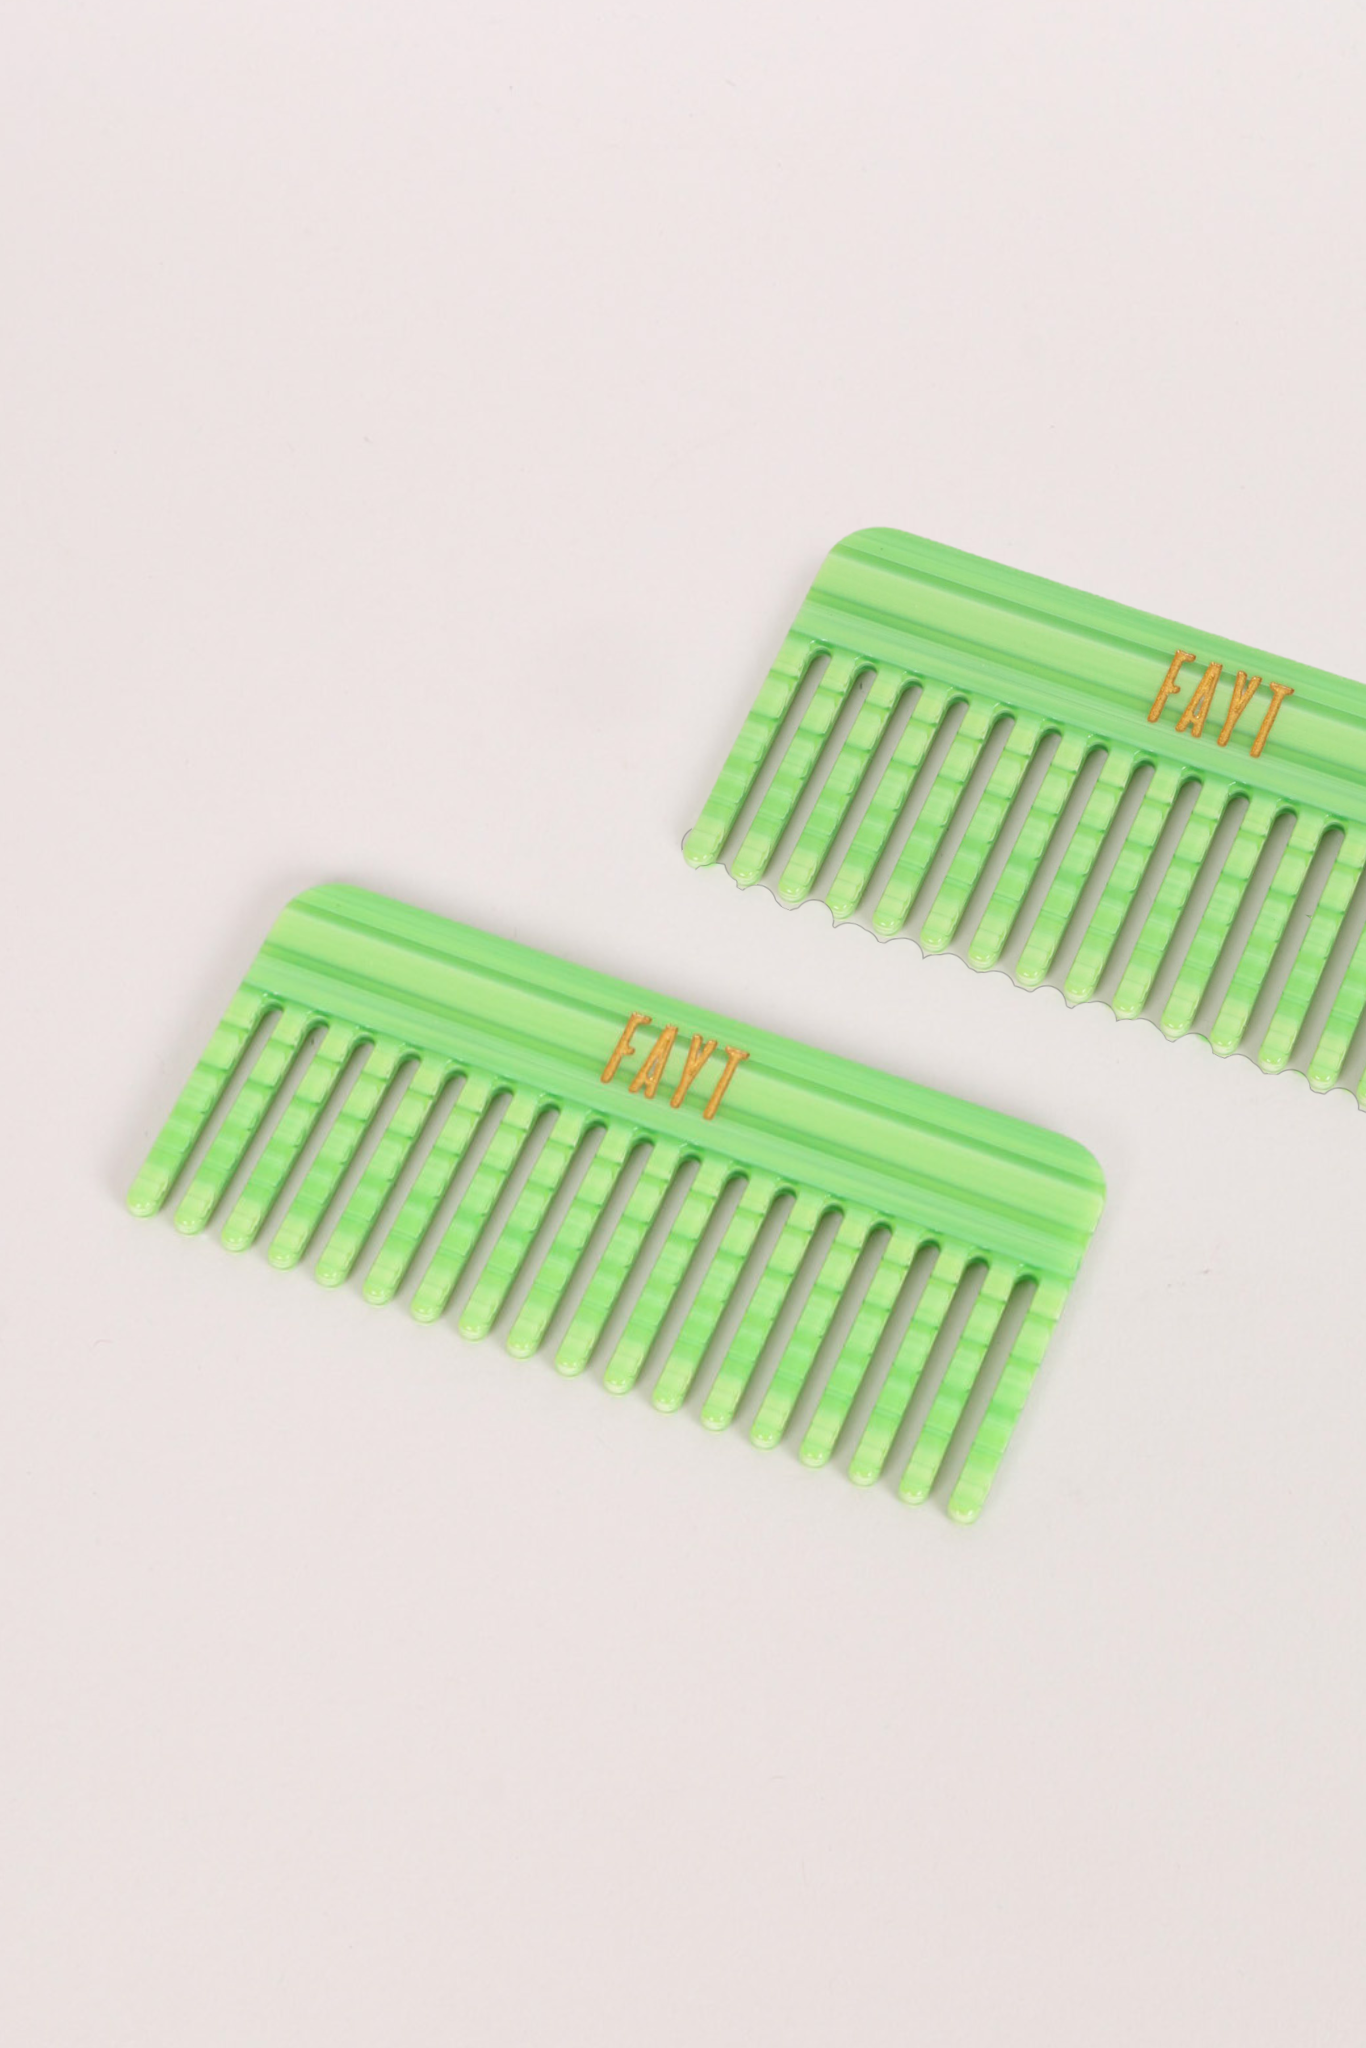 FAYT WIDE TOOTH COMB LIME GREEN